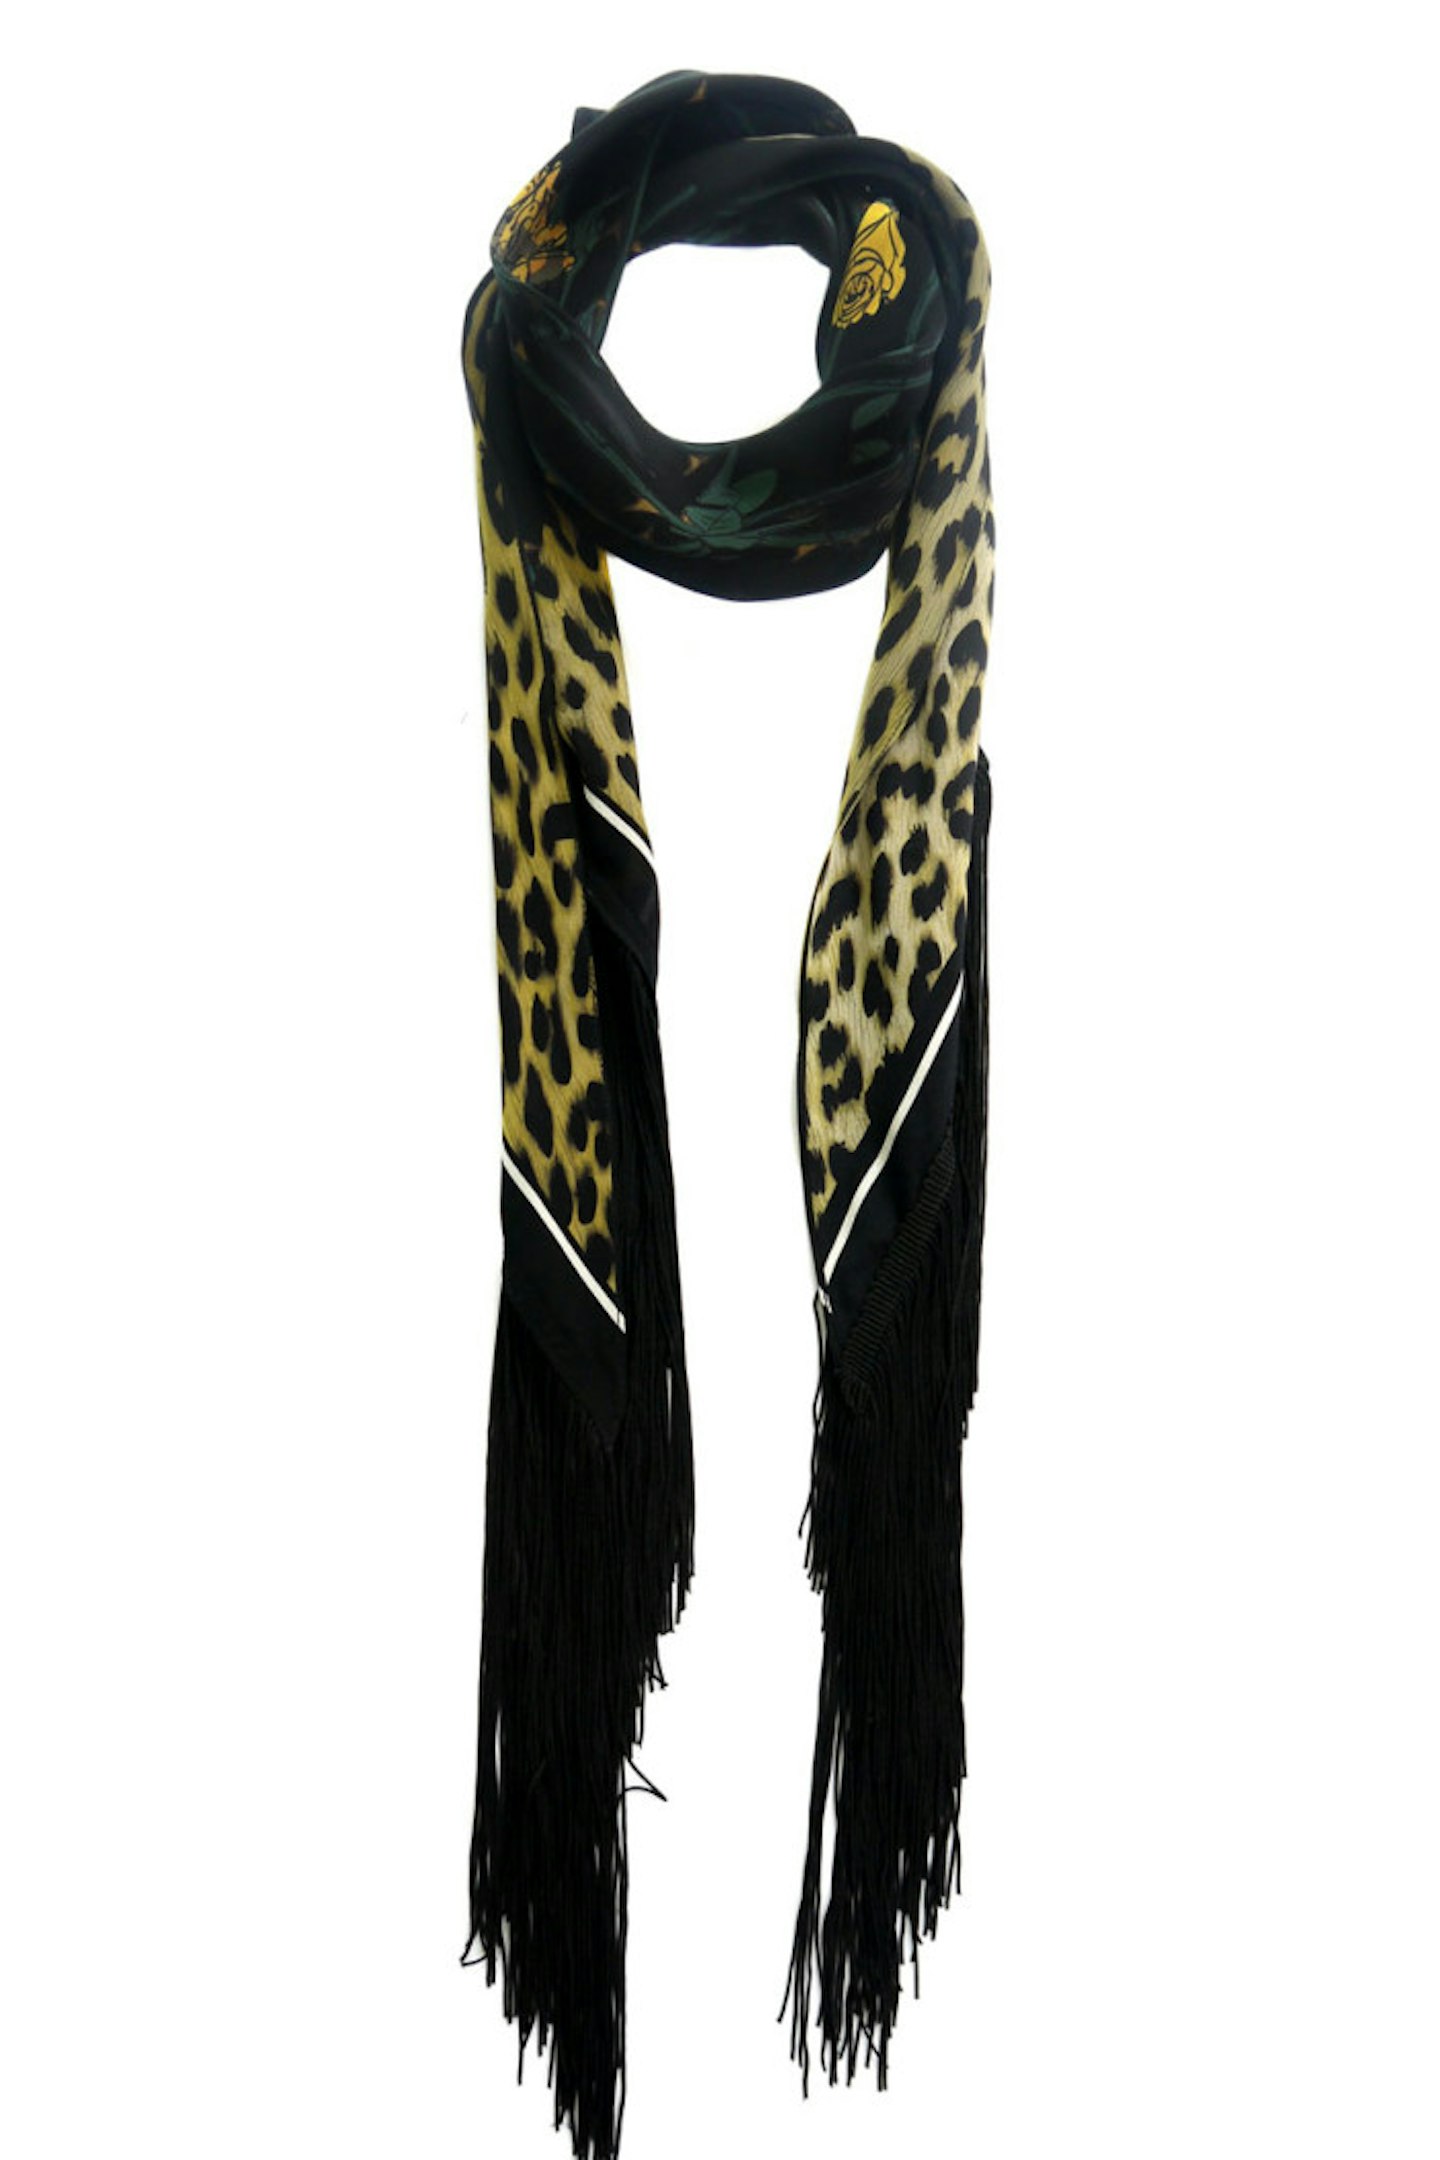 There's nothing like a skinny scarf to add a touch of rock n'roll glam to your evening look. Look no further than Rockins to find your favourite.